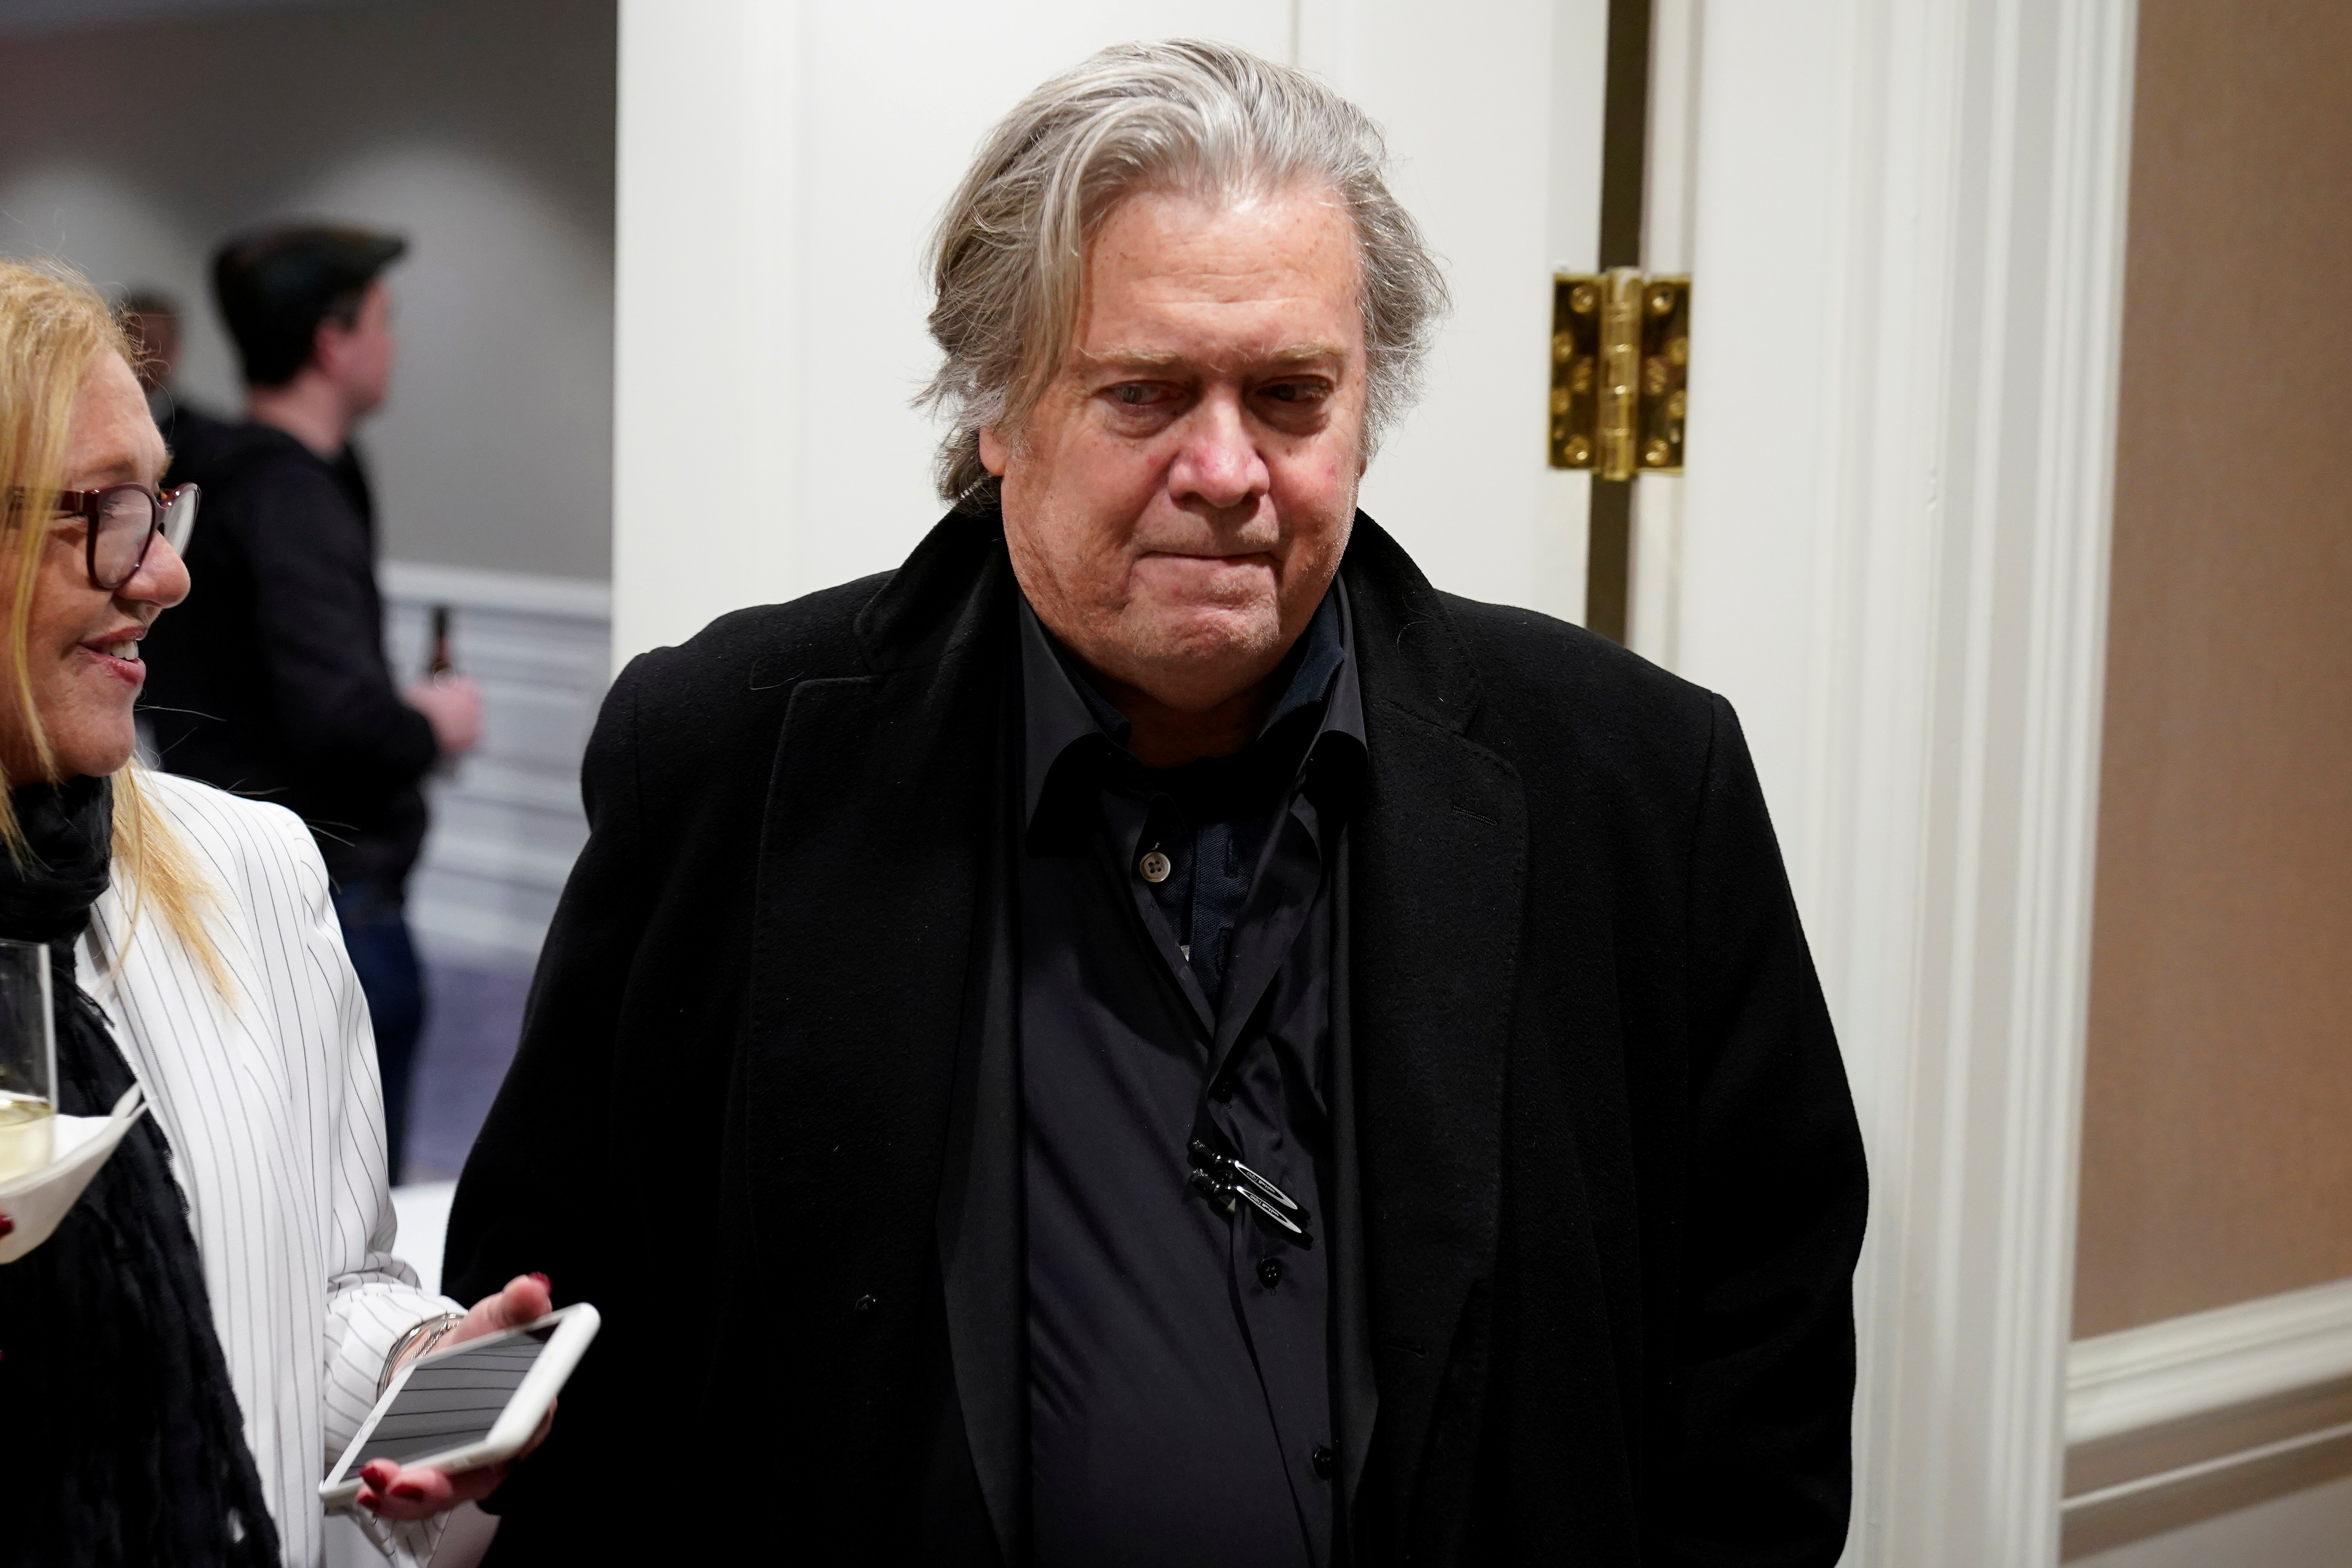 Former White House Chief Strategist Stephen Bannon arrives for the showing of a documentary on the government of Brazilian President Jair Bolsonaro in Washington